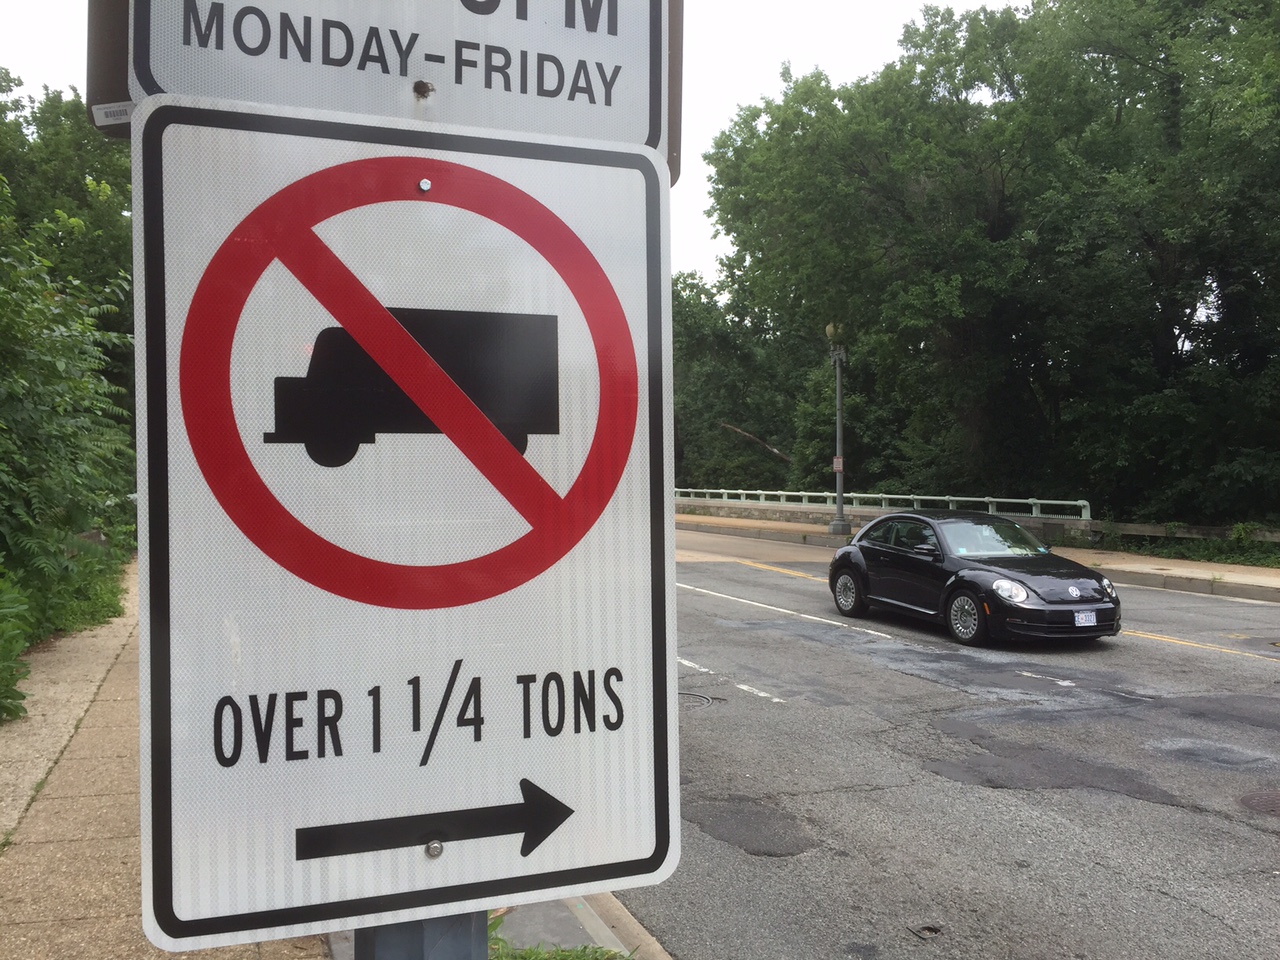 A sign shows that no trucks more than 1 1/4 ton are allowed on the scenic highway. (WTOP/Dave Dildine)